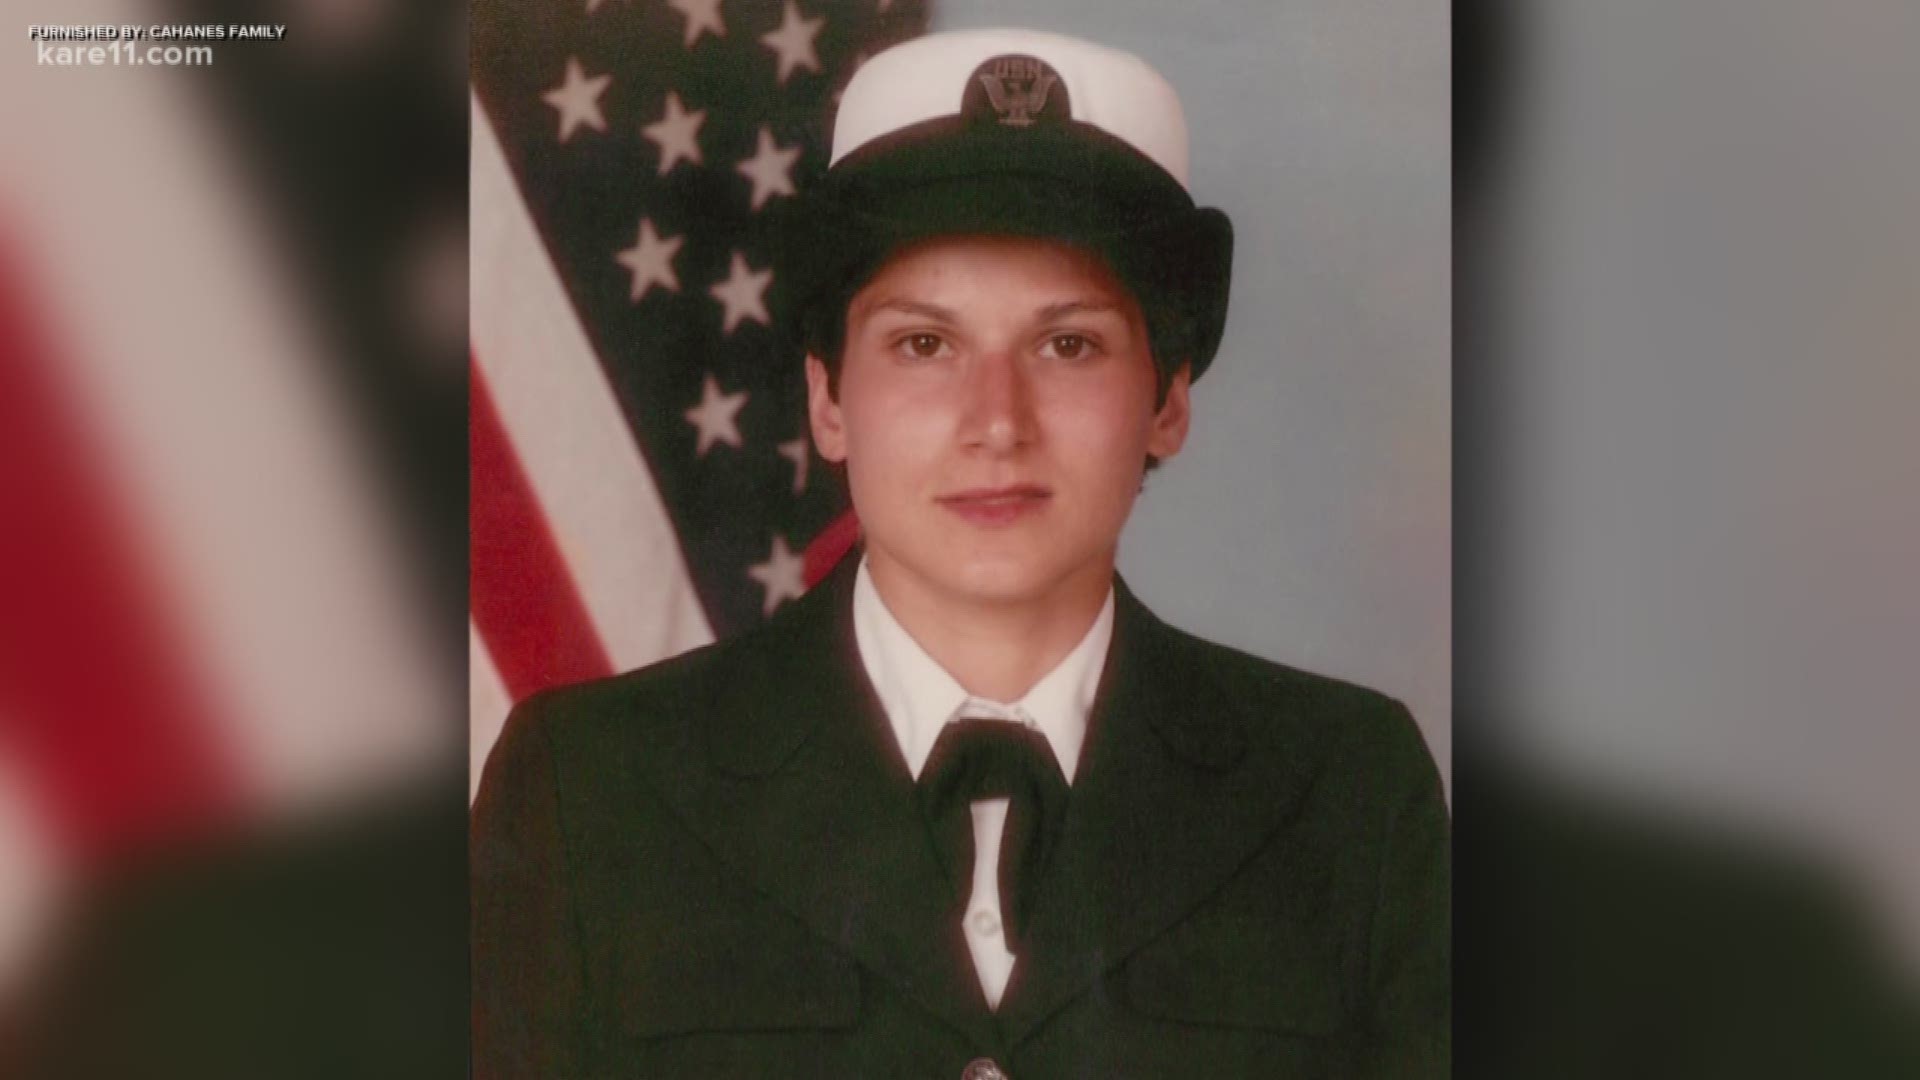 In Aug. 1984, a promising young Navy recruit from Stillwater, Minnesota, was found dead in Florida. Police believe they've now solved her murder.